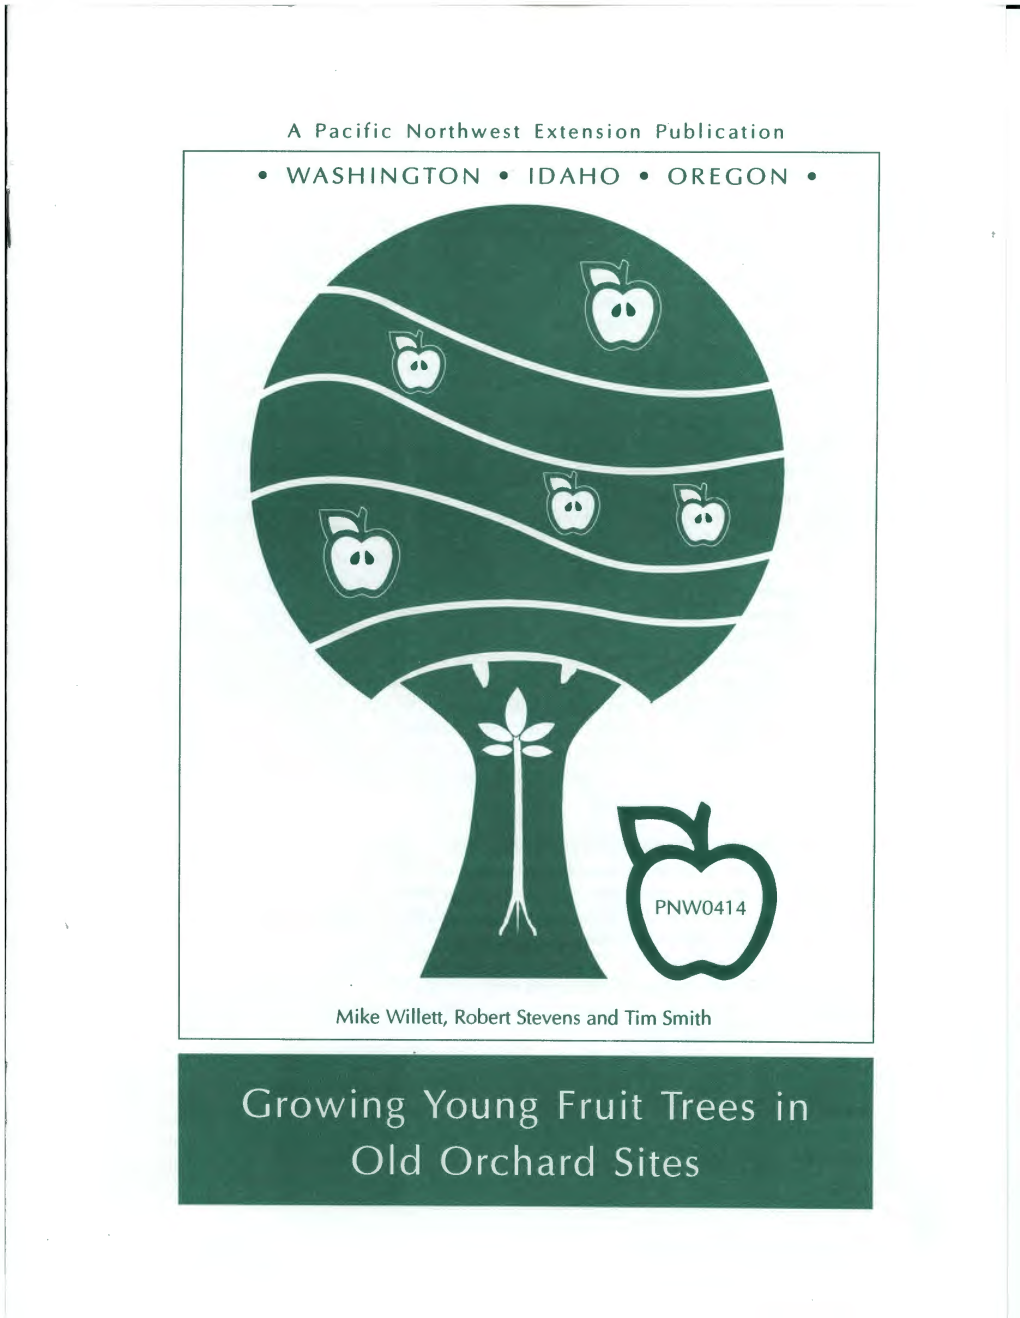 Growing Young Fruit Trees in Old Orchard Sites Introduction